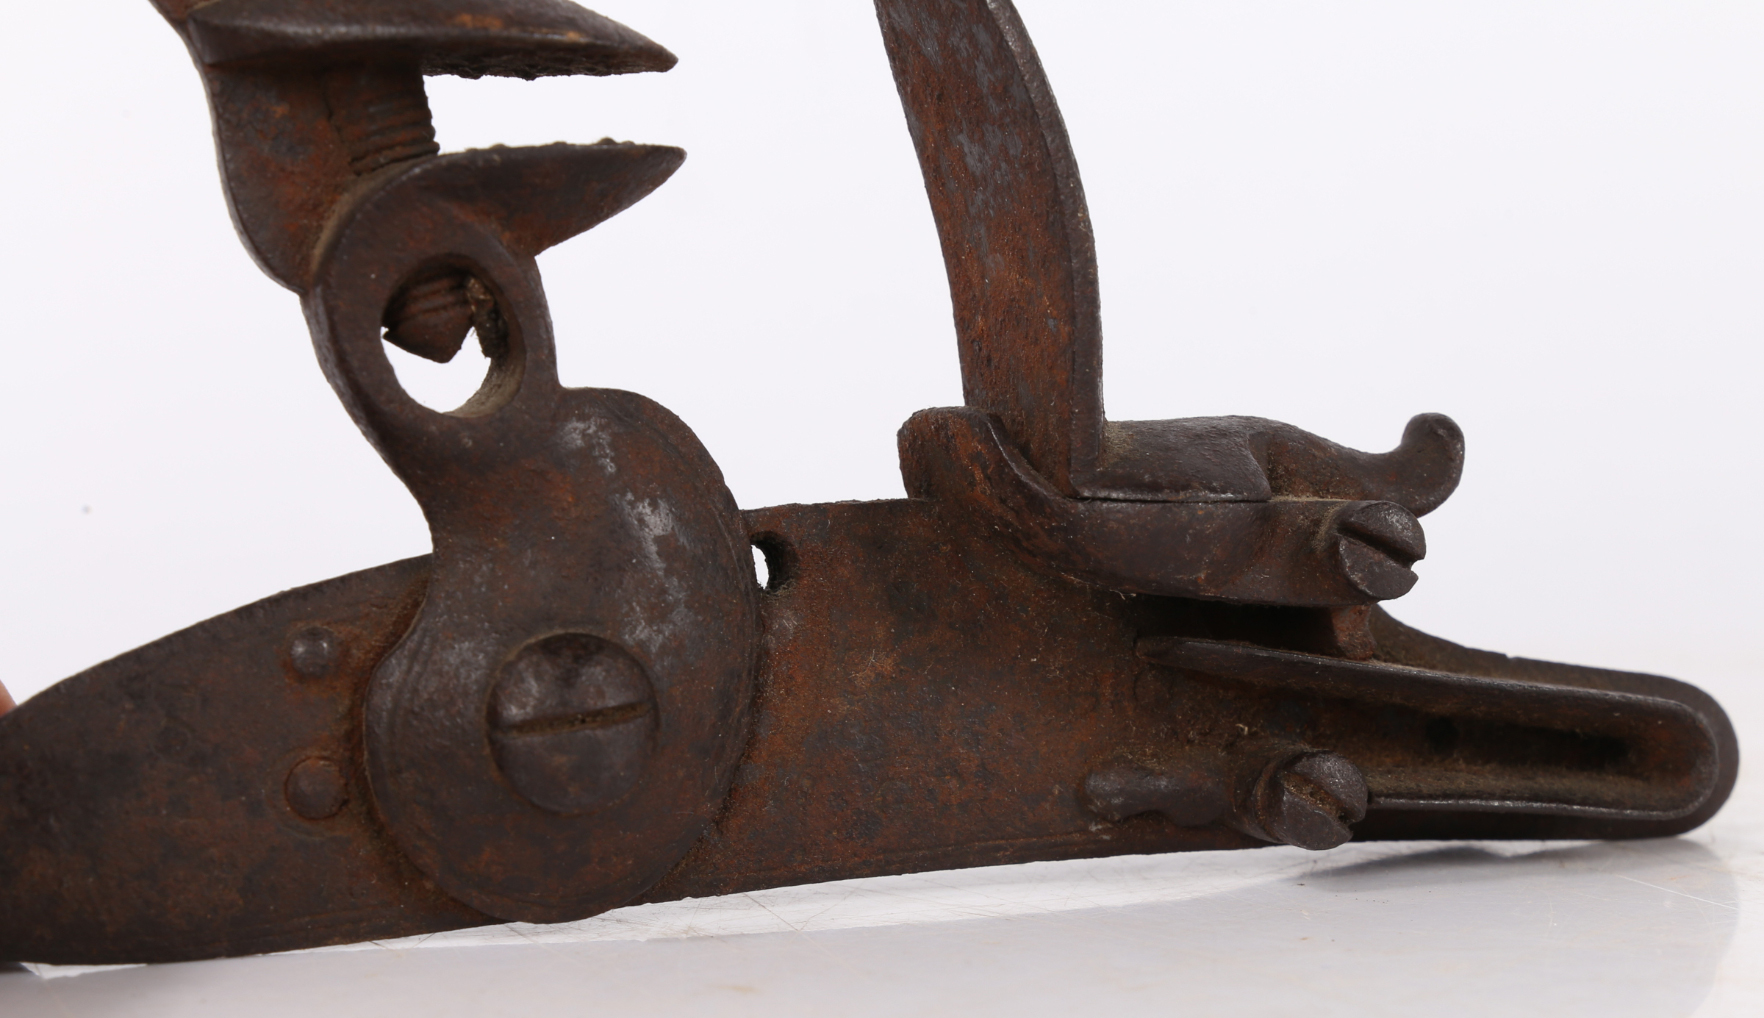 18th/19th century detached flintlock mechanism, the lock plate marked with a crown over 'GR' 'TOWER' - Image 3 of 3